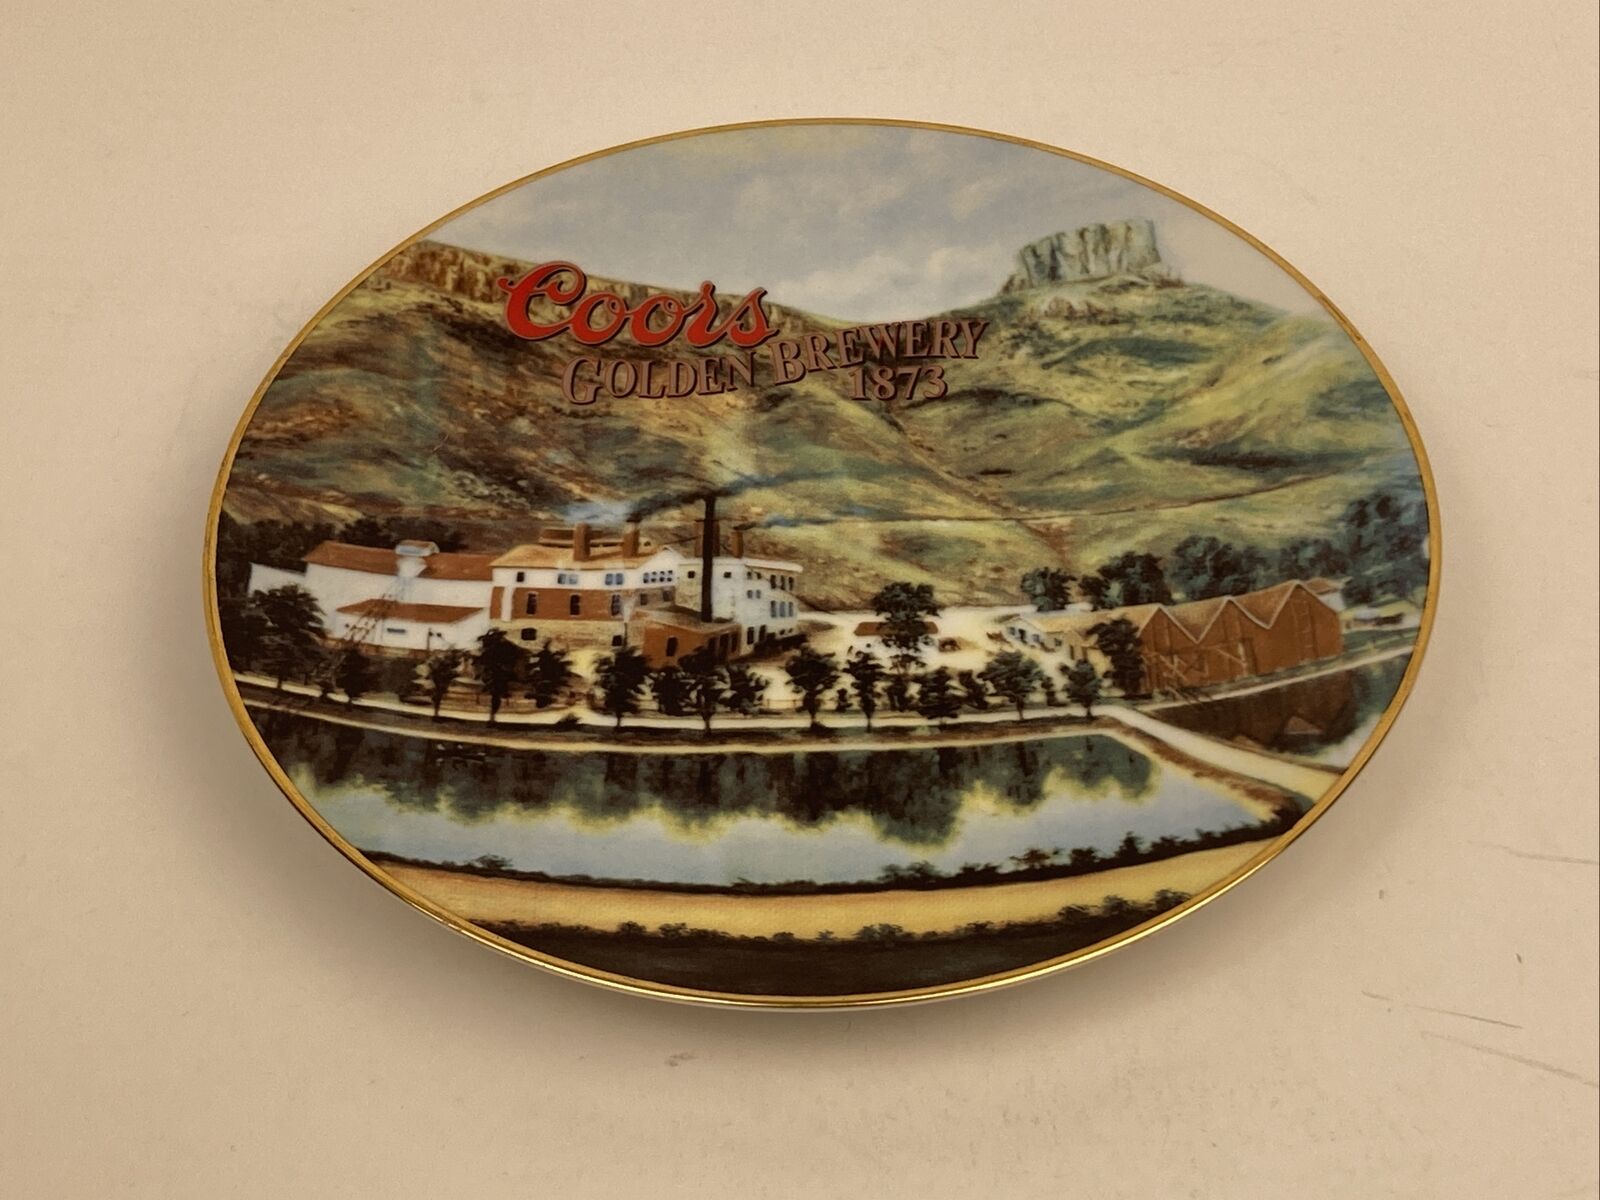 Coors Commemorative Collectors Plate Golden Brewery 1873 #911 of 20,000 NO Chips